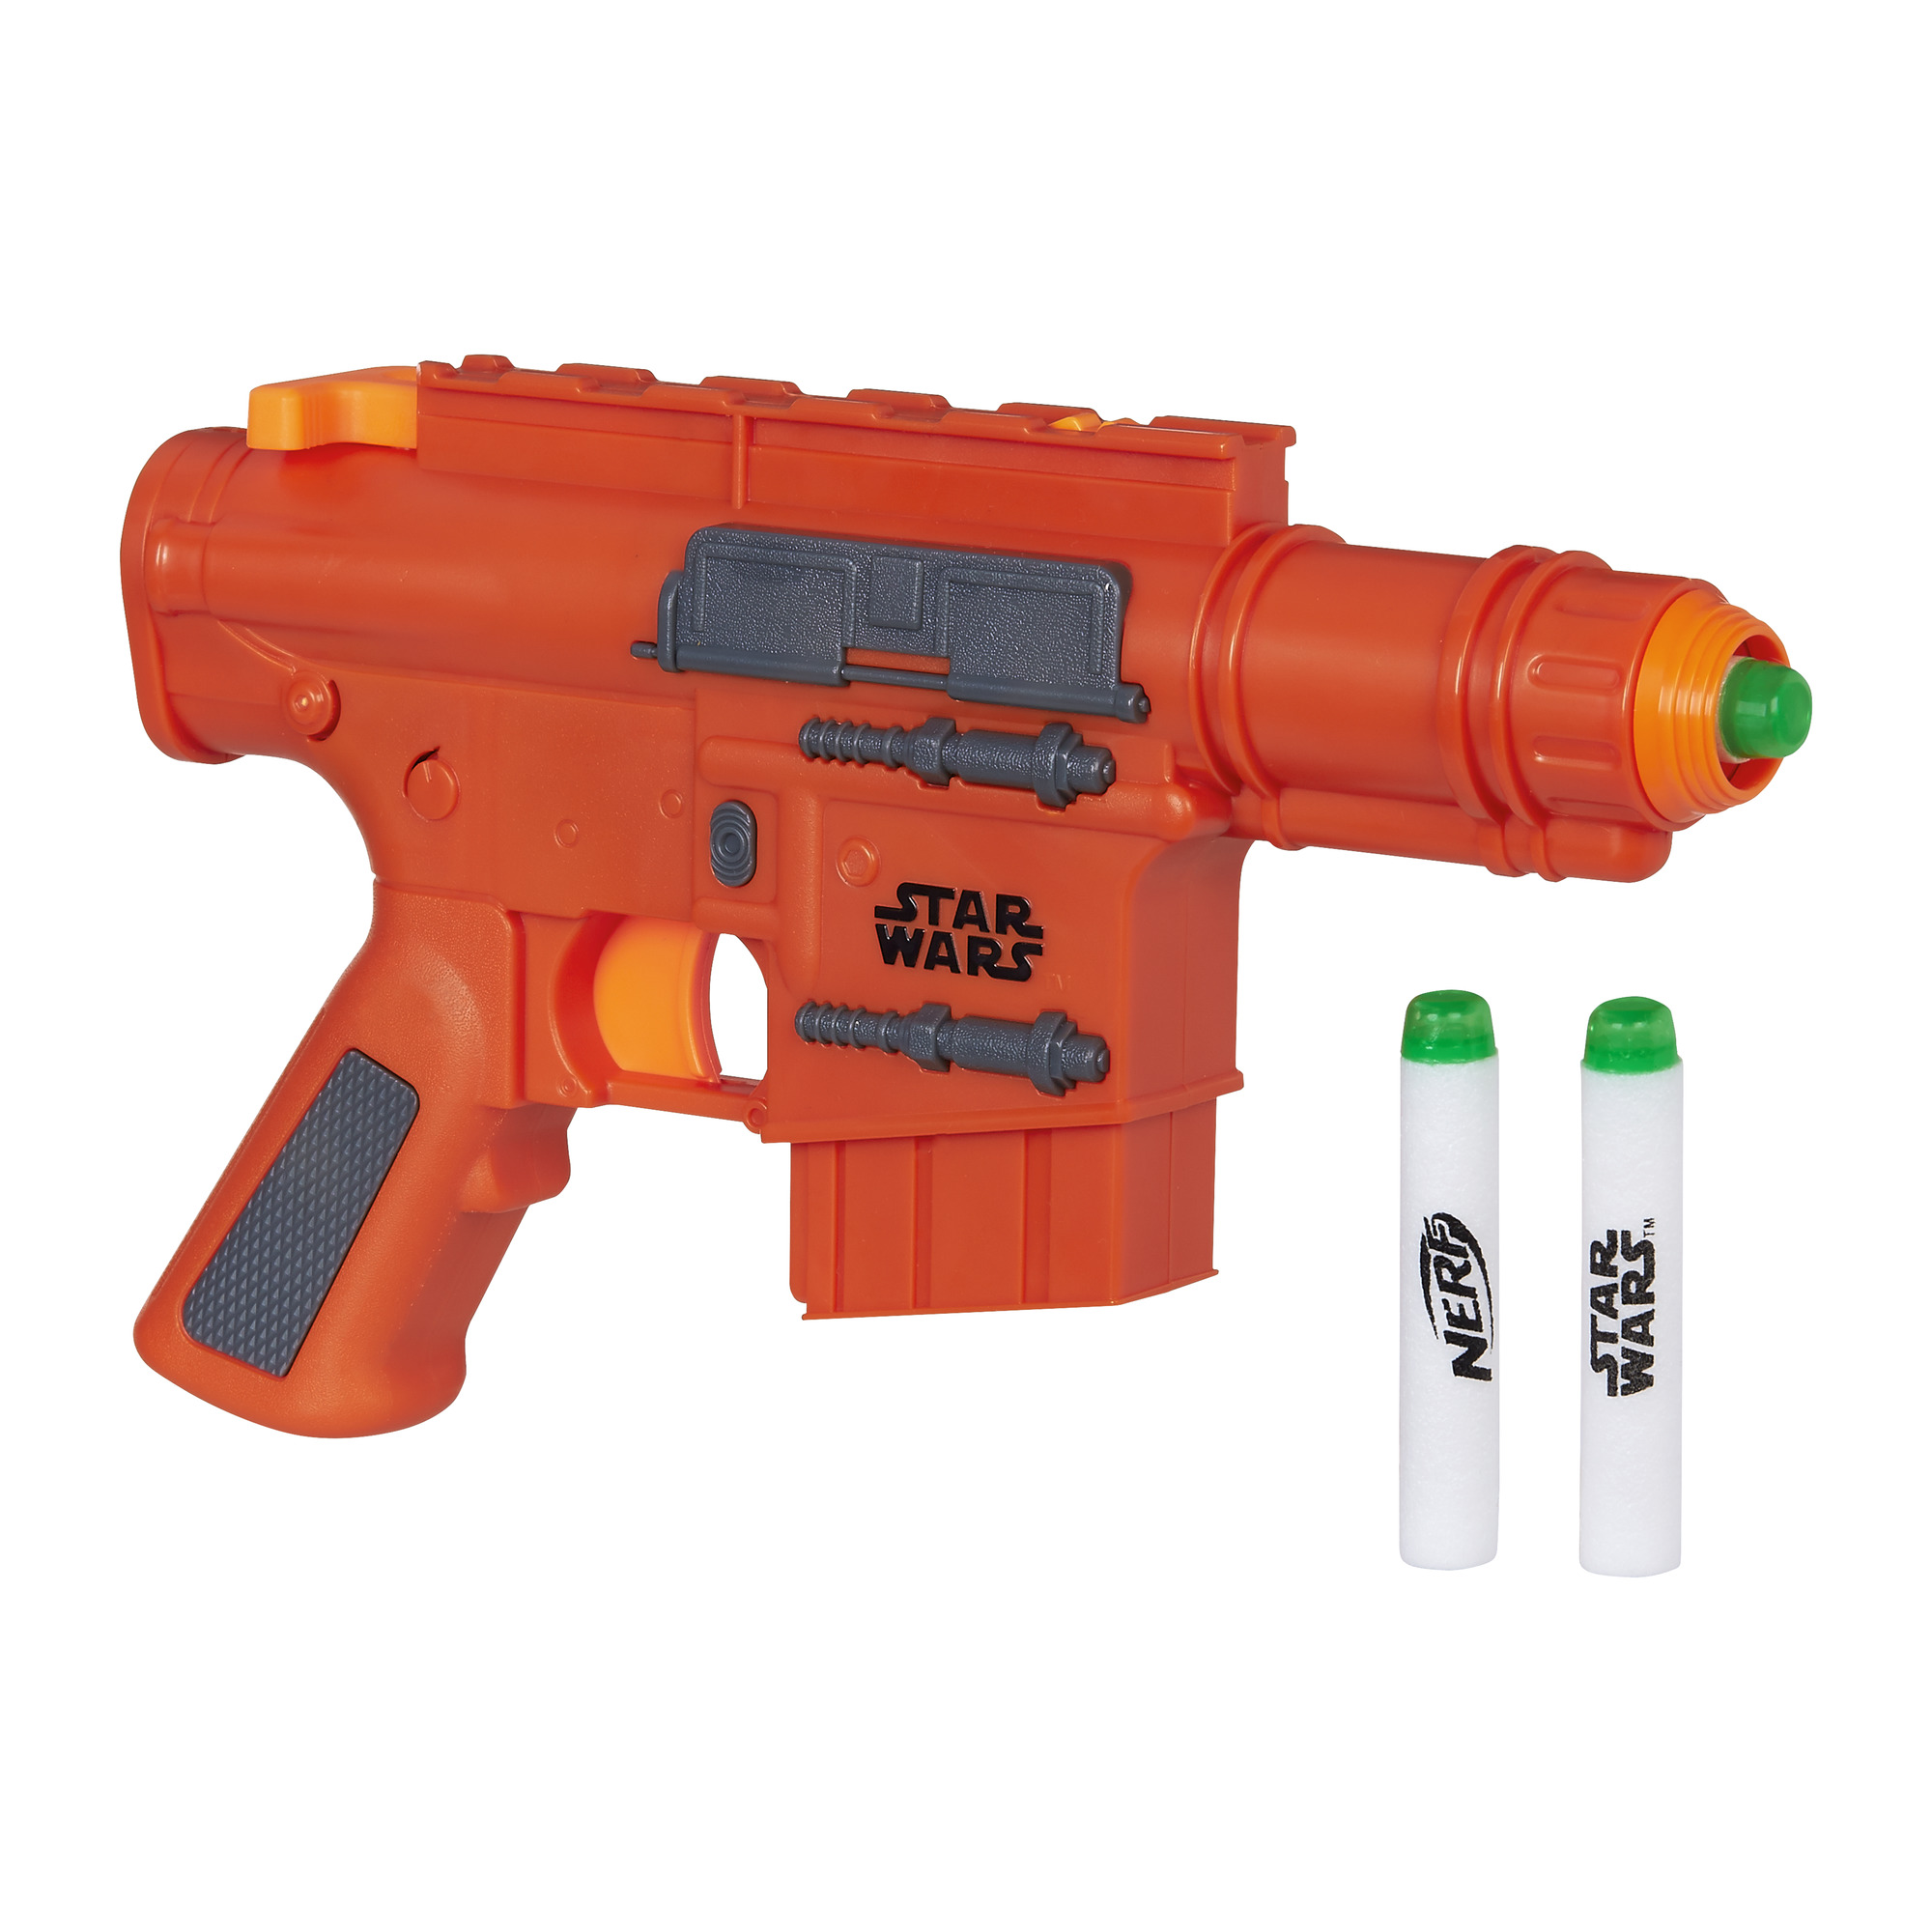 UPC 630509450688 product image for Star Wars Rogue One Nerf Captain Cassian Andor Blaster | upcitemdb.com